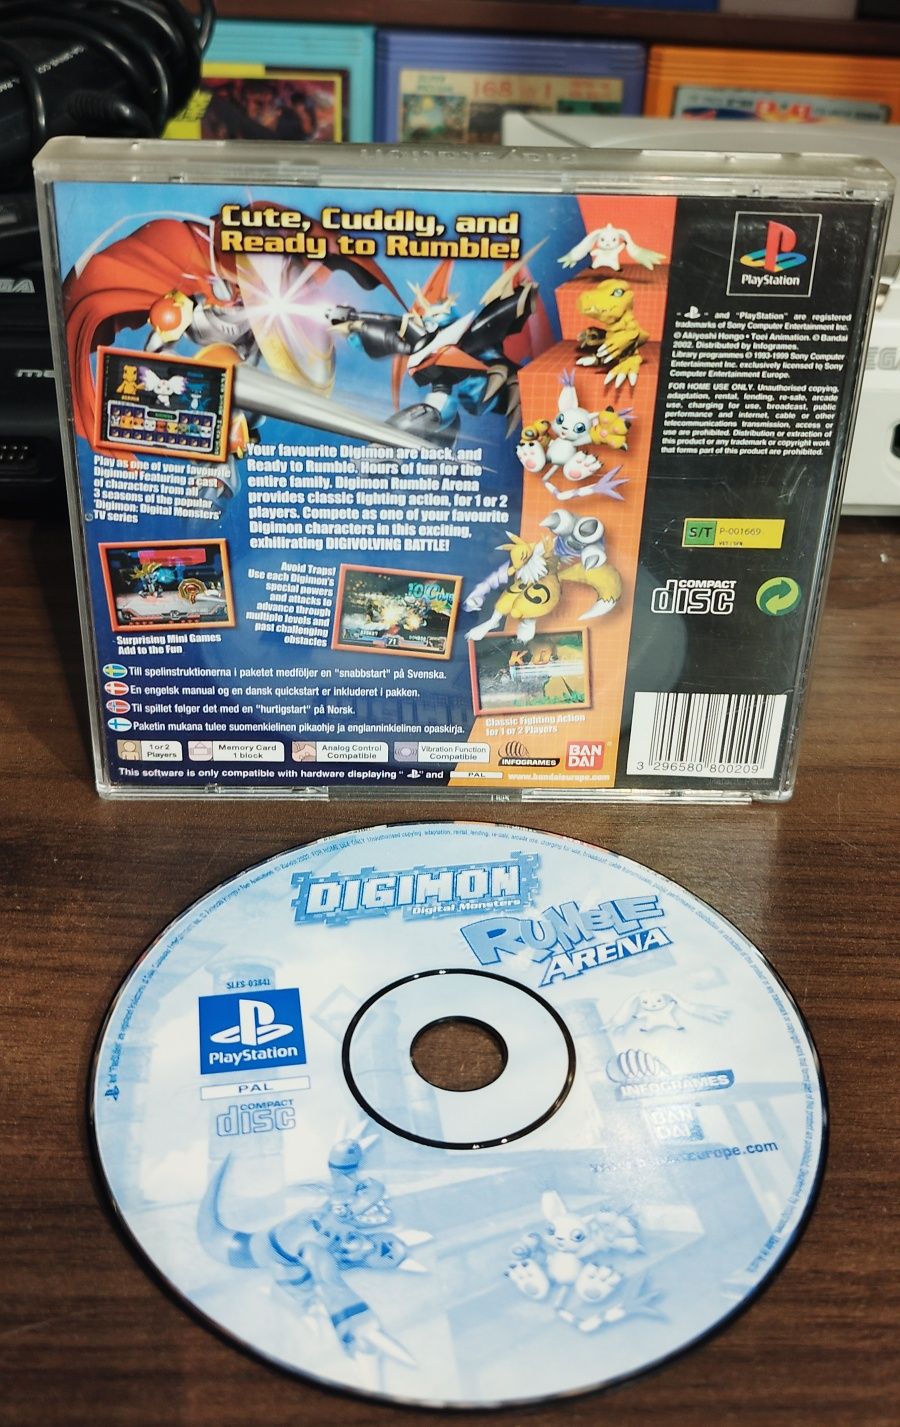 Digimon rumble arena PS1 PSX PS one